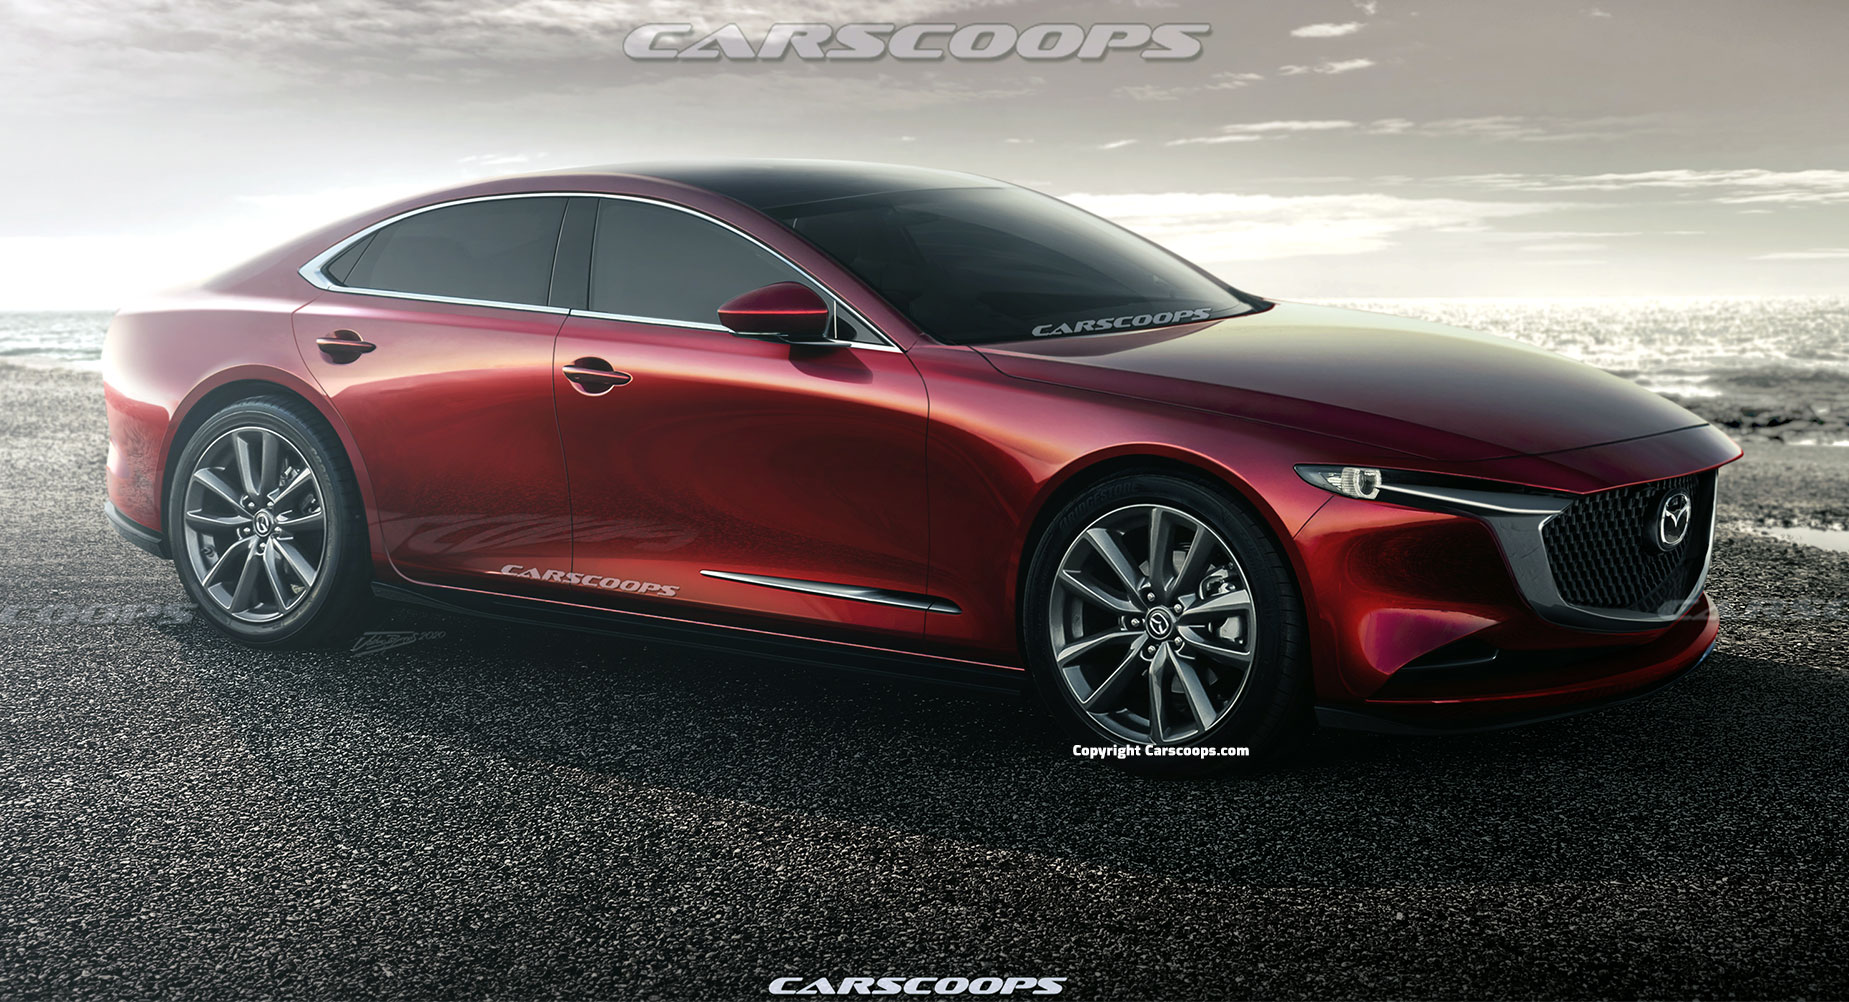 New Mazda6 Might Finally Launch In 2022 With RWD And InlineSix Engines